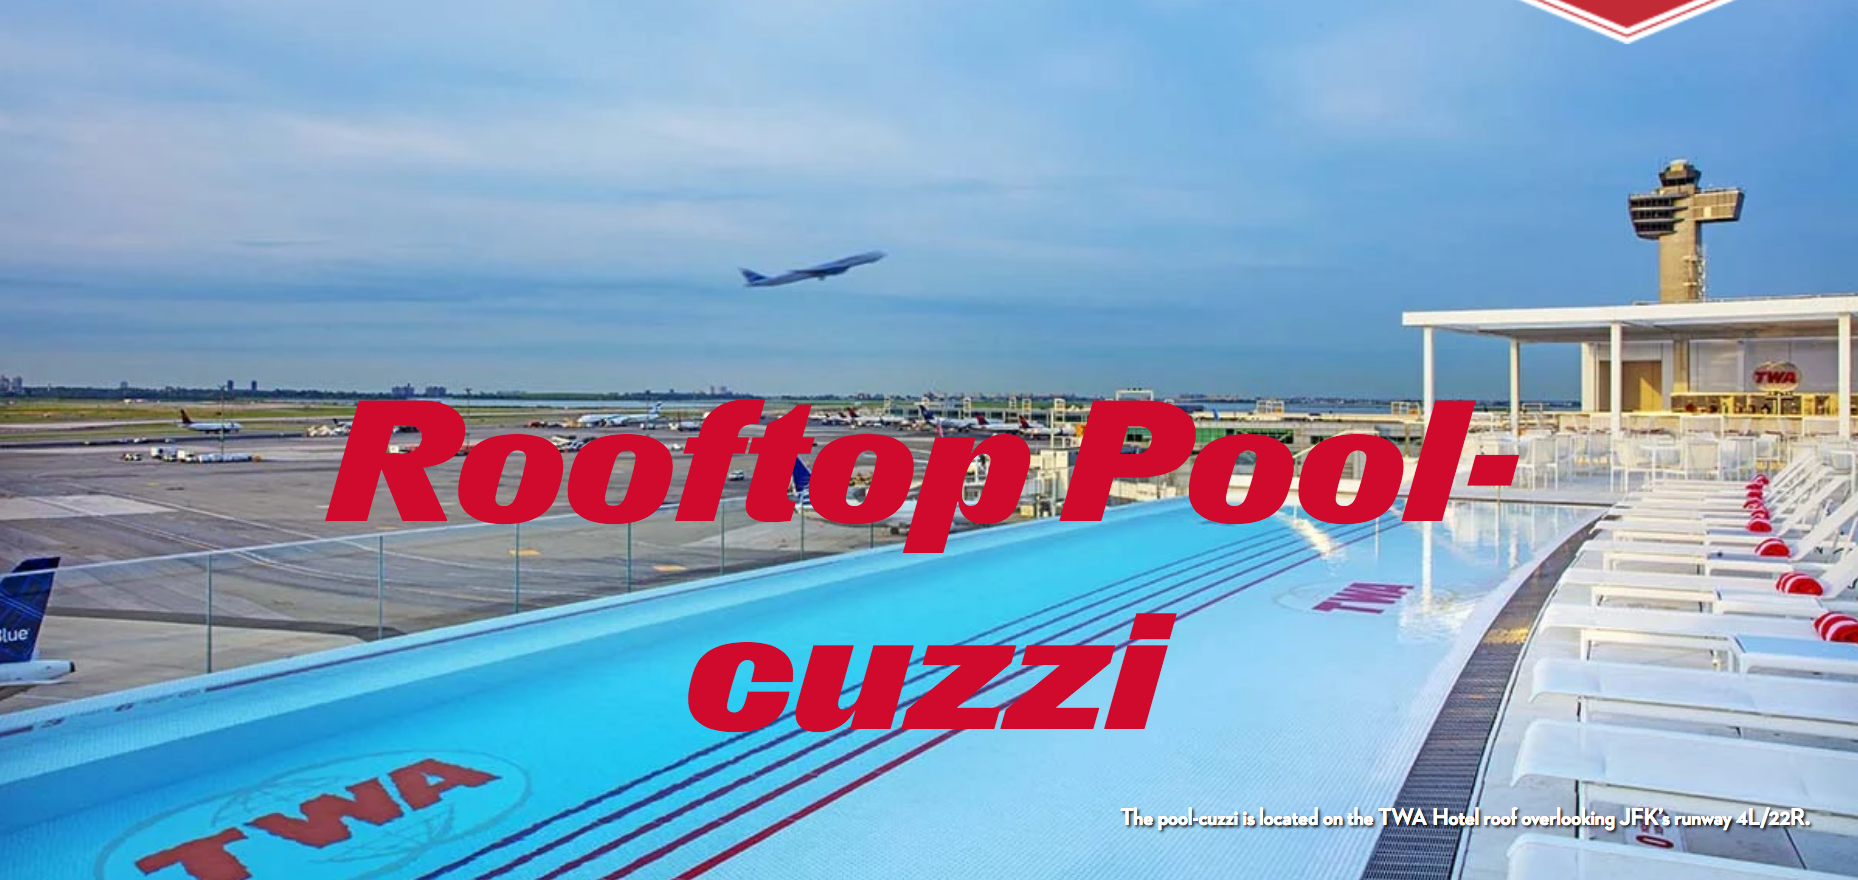 a plane flying over a pool